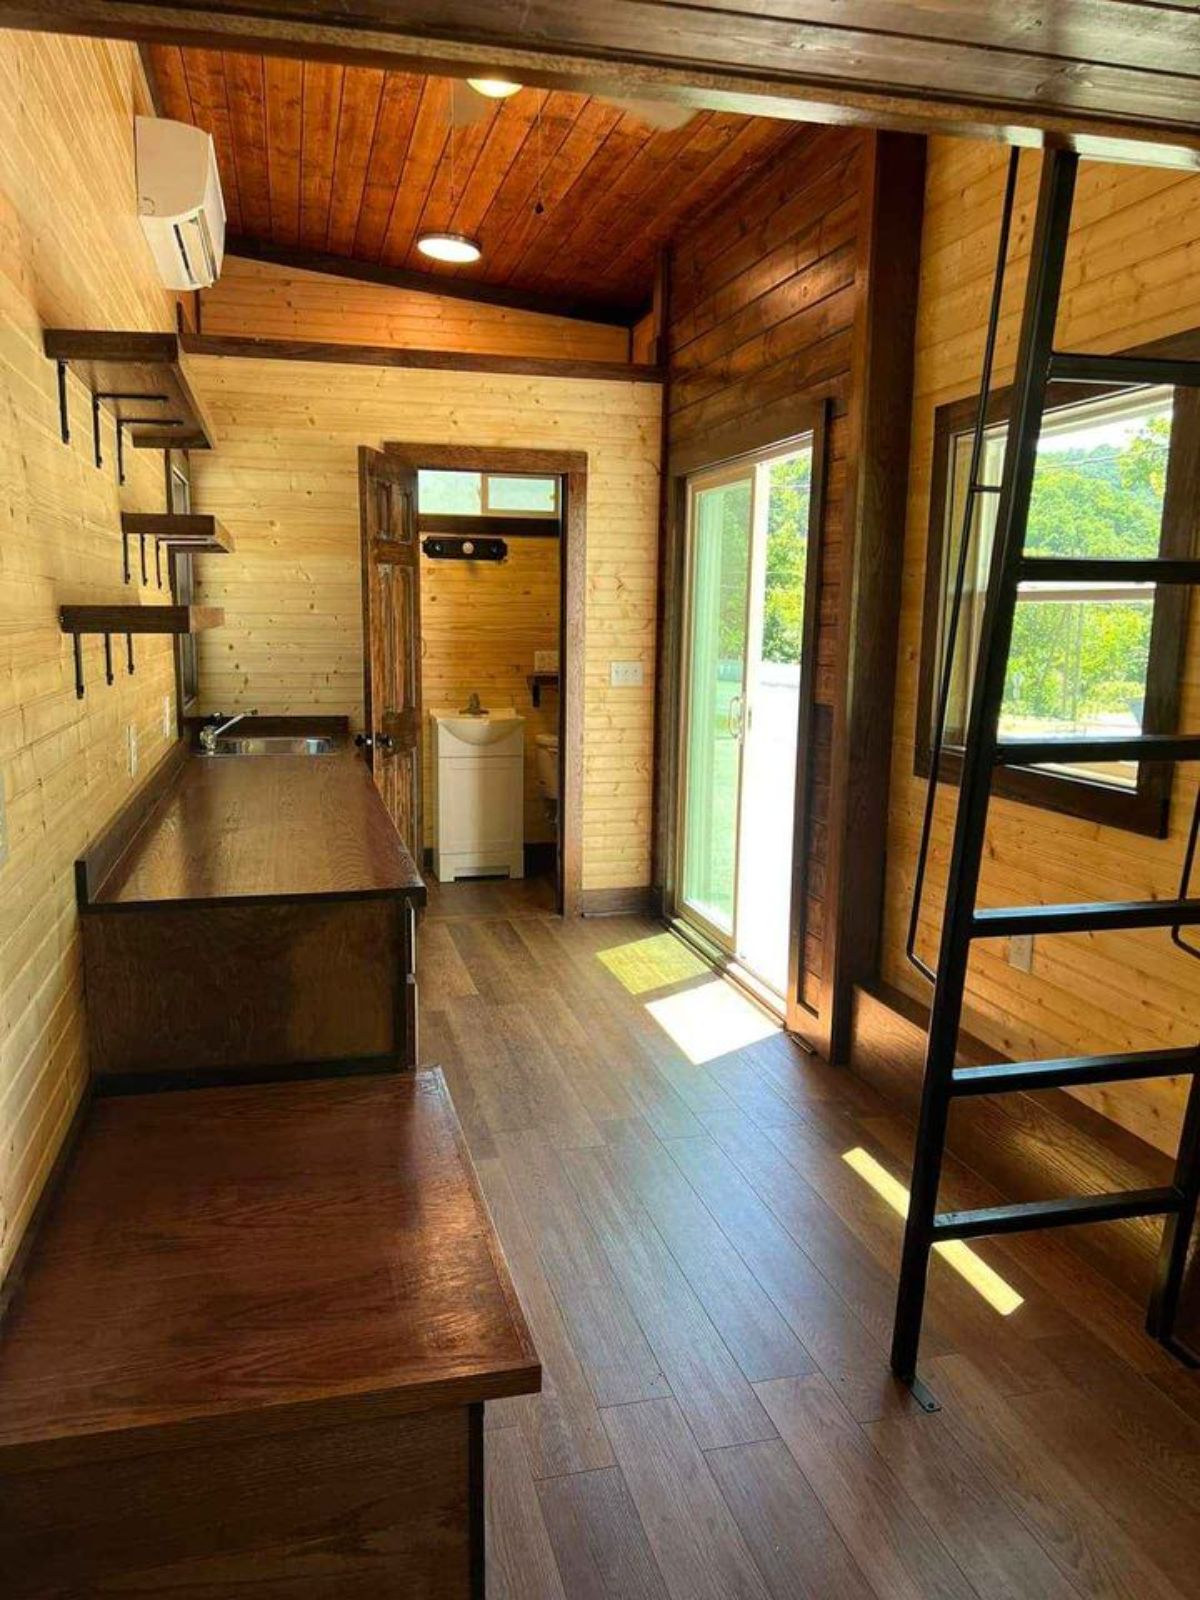 Wooden interior of Spacious Tiny House